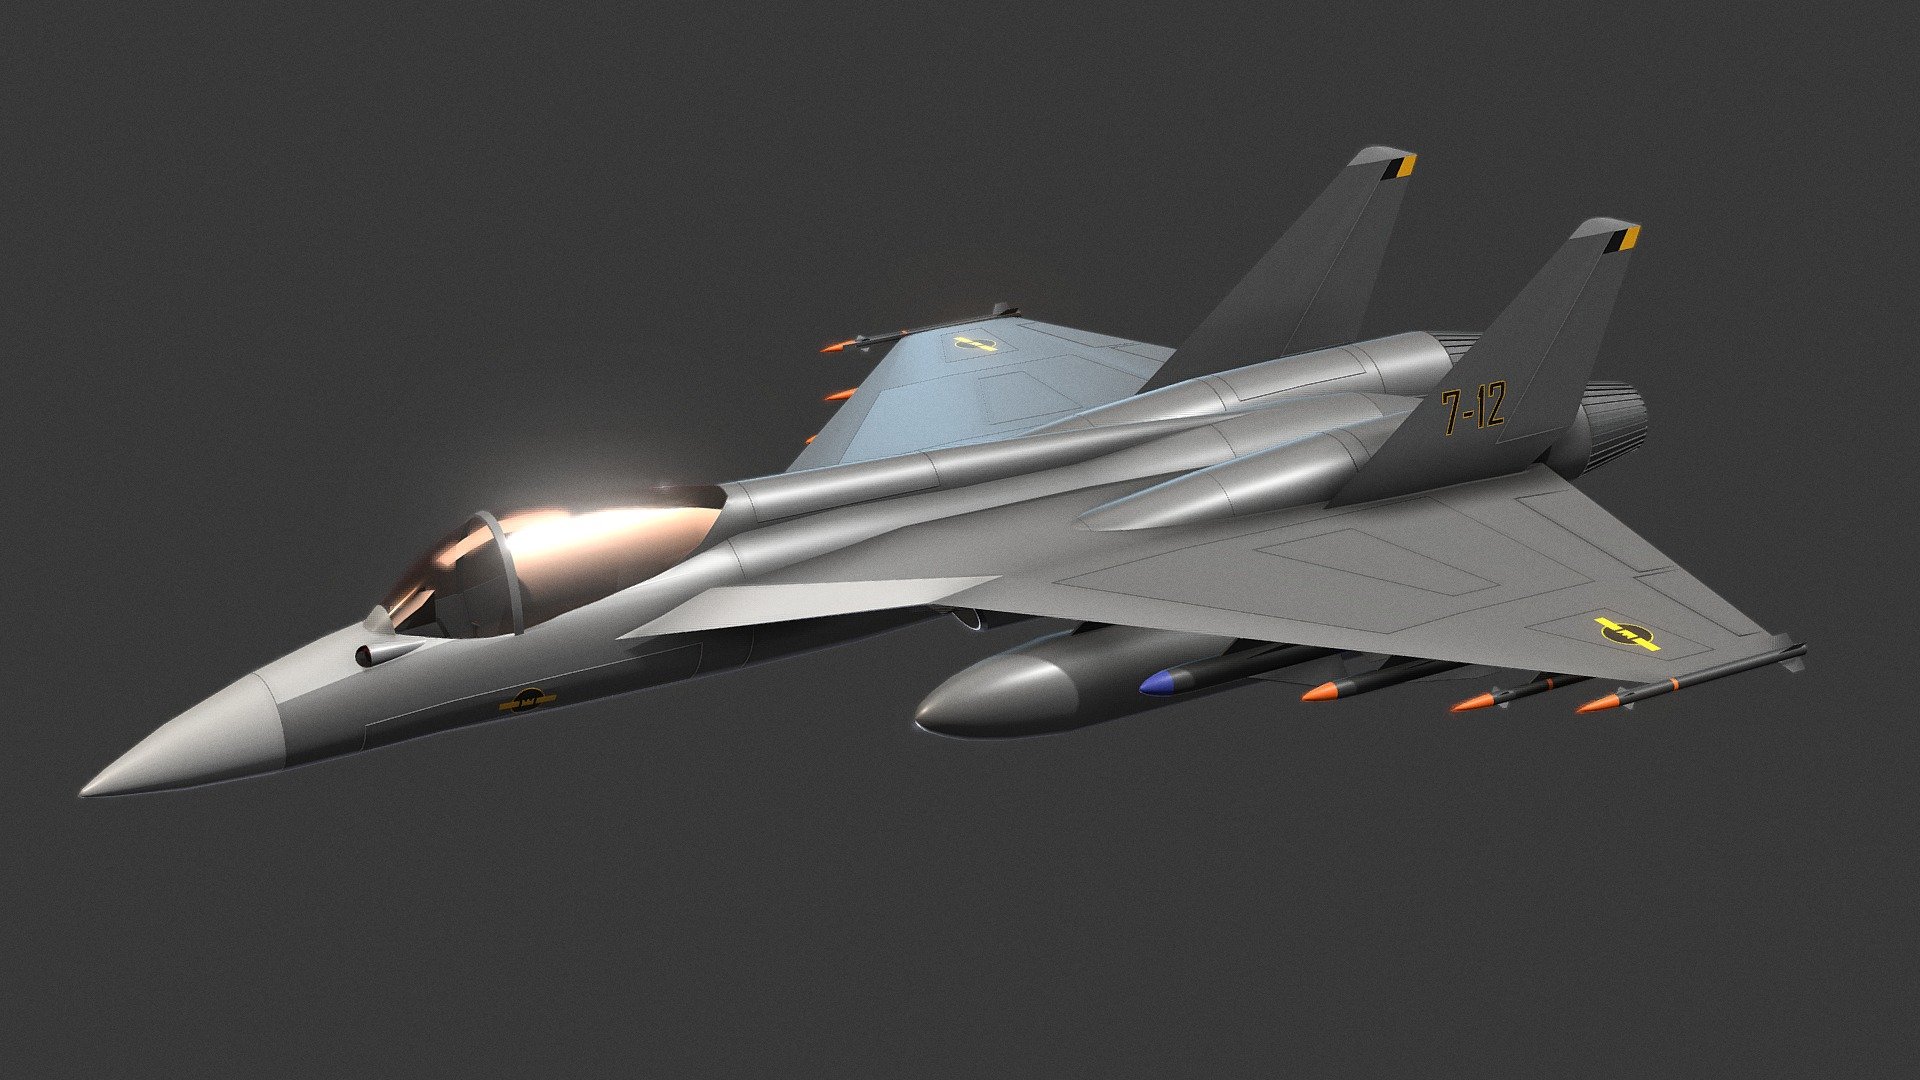 Carrier based multirole fighter. Designed primarily for air superiority and anti-ship operations - SK-26 - 3D model by nestor_d 3d model